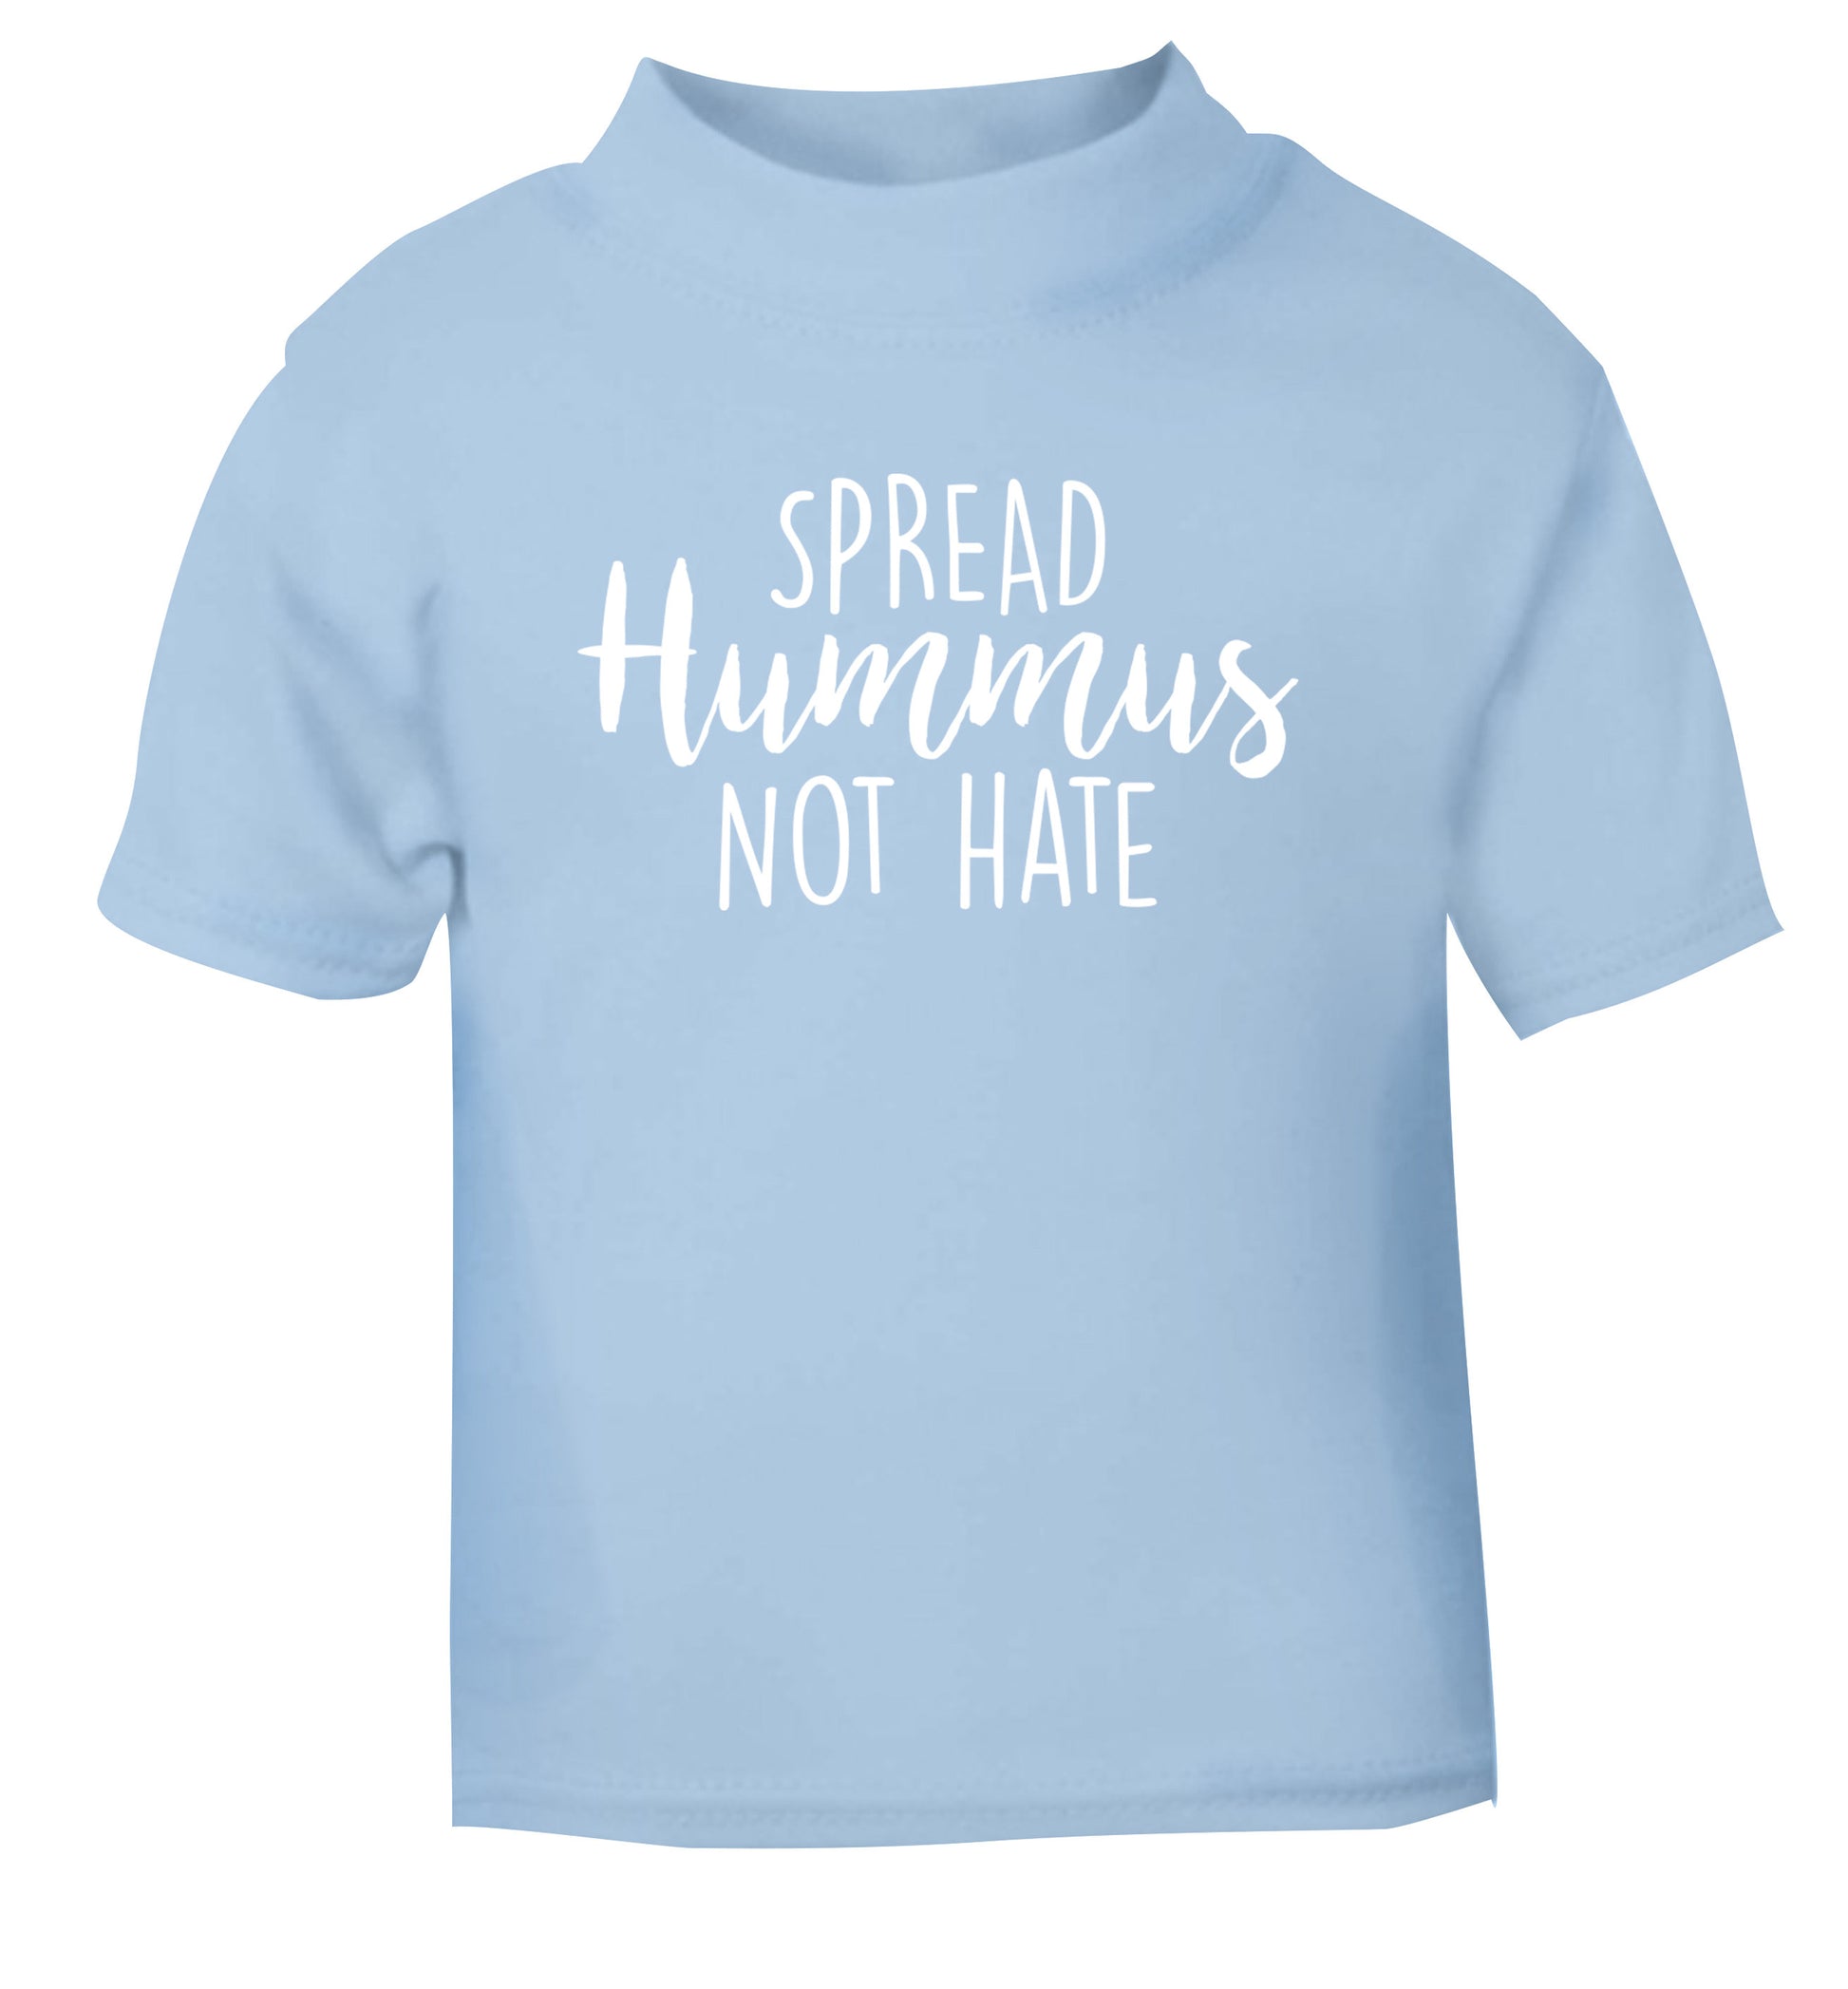 Spread hummus not hate script text light blue Baby Toddler Tshirt 2 Years